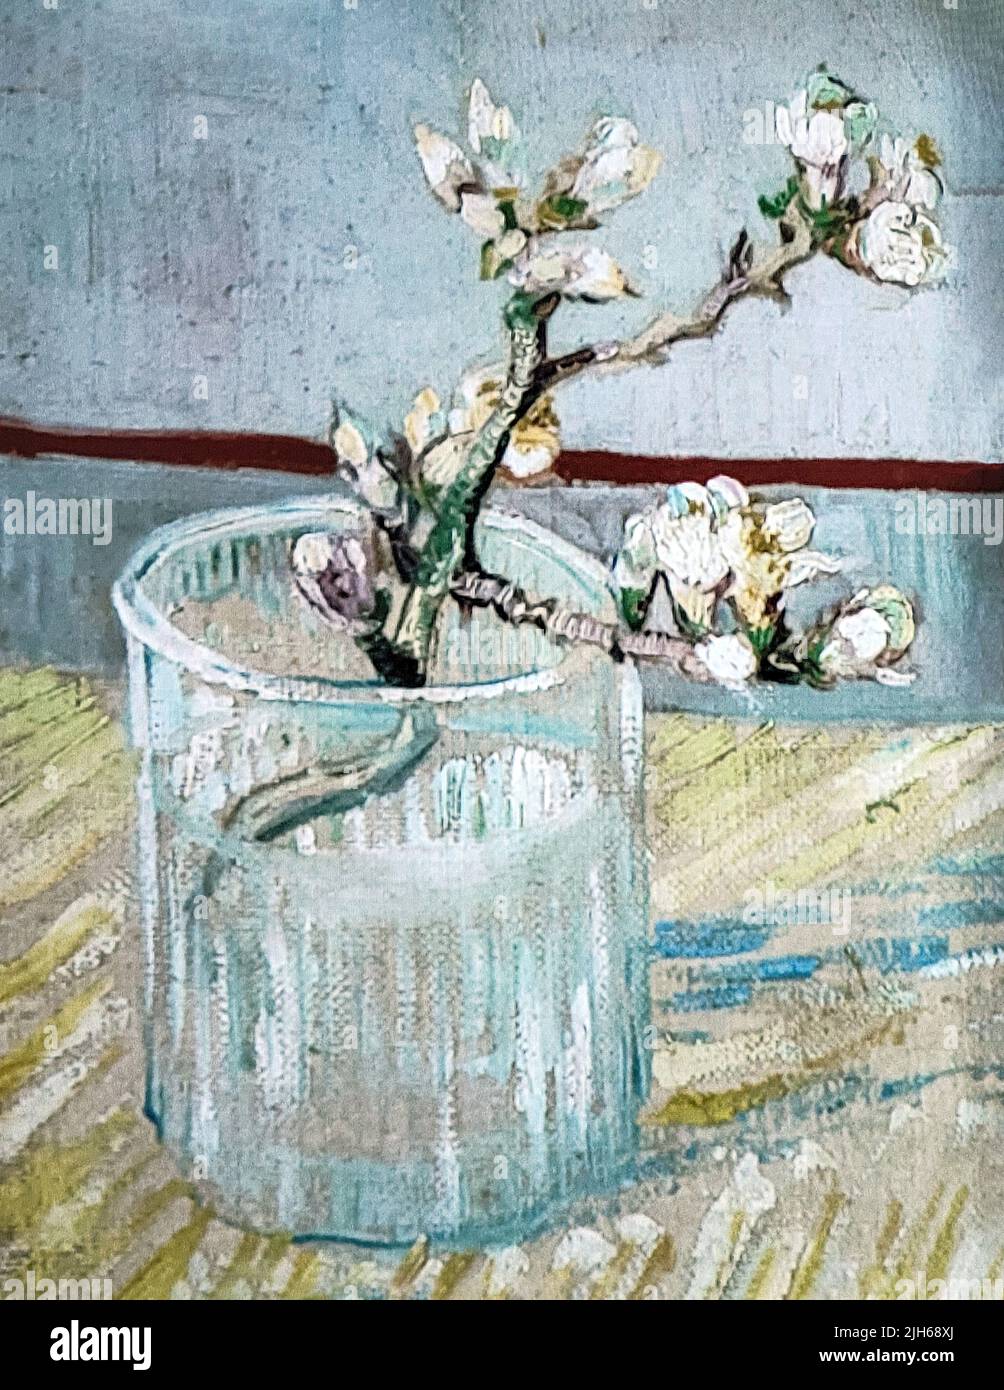 Close up of a Vincent Van Gogh oil painting of a single blossoming almond branch in a water glass Stock Photo